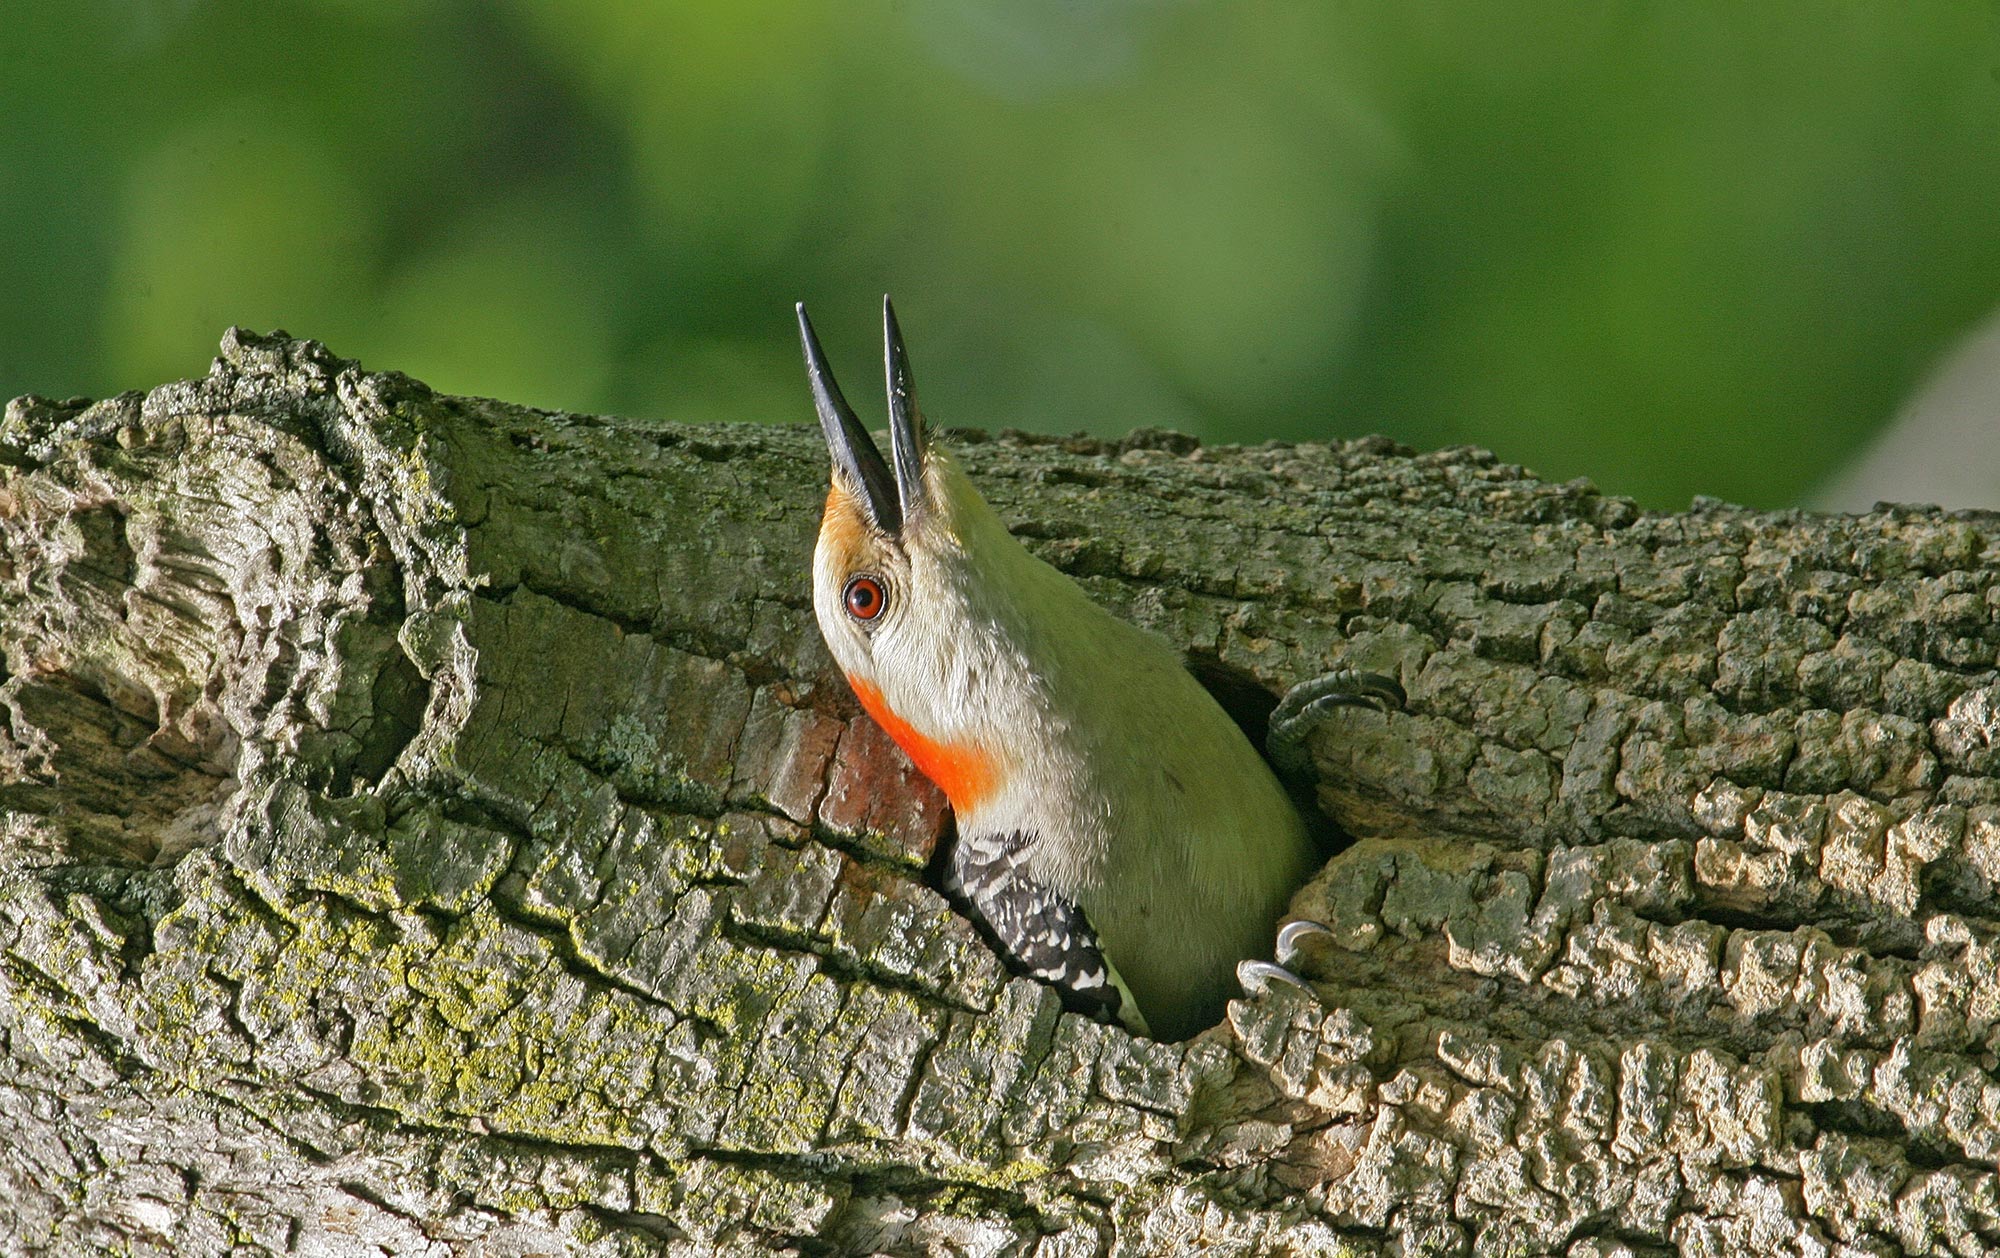 A red-bellied woodpecker poking its head out of a tree cavity.